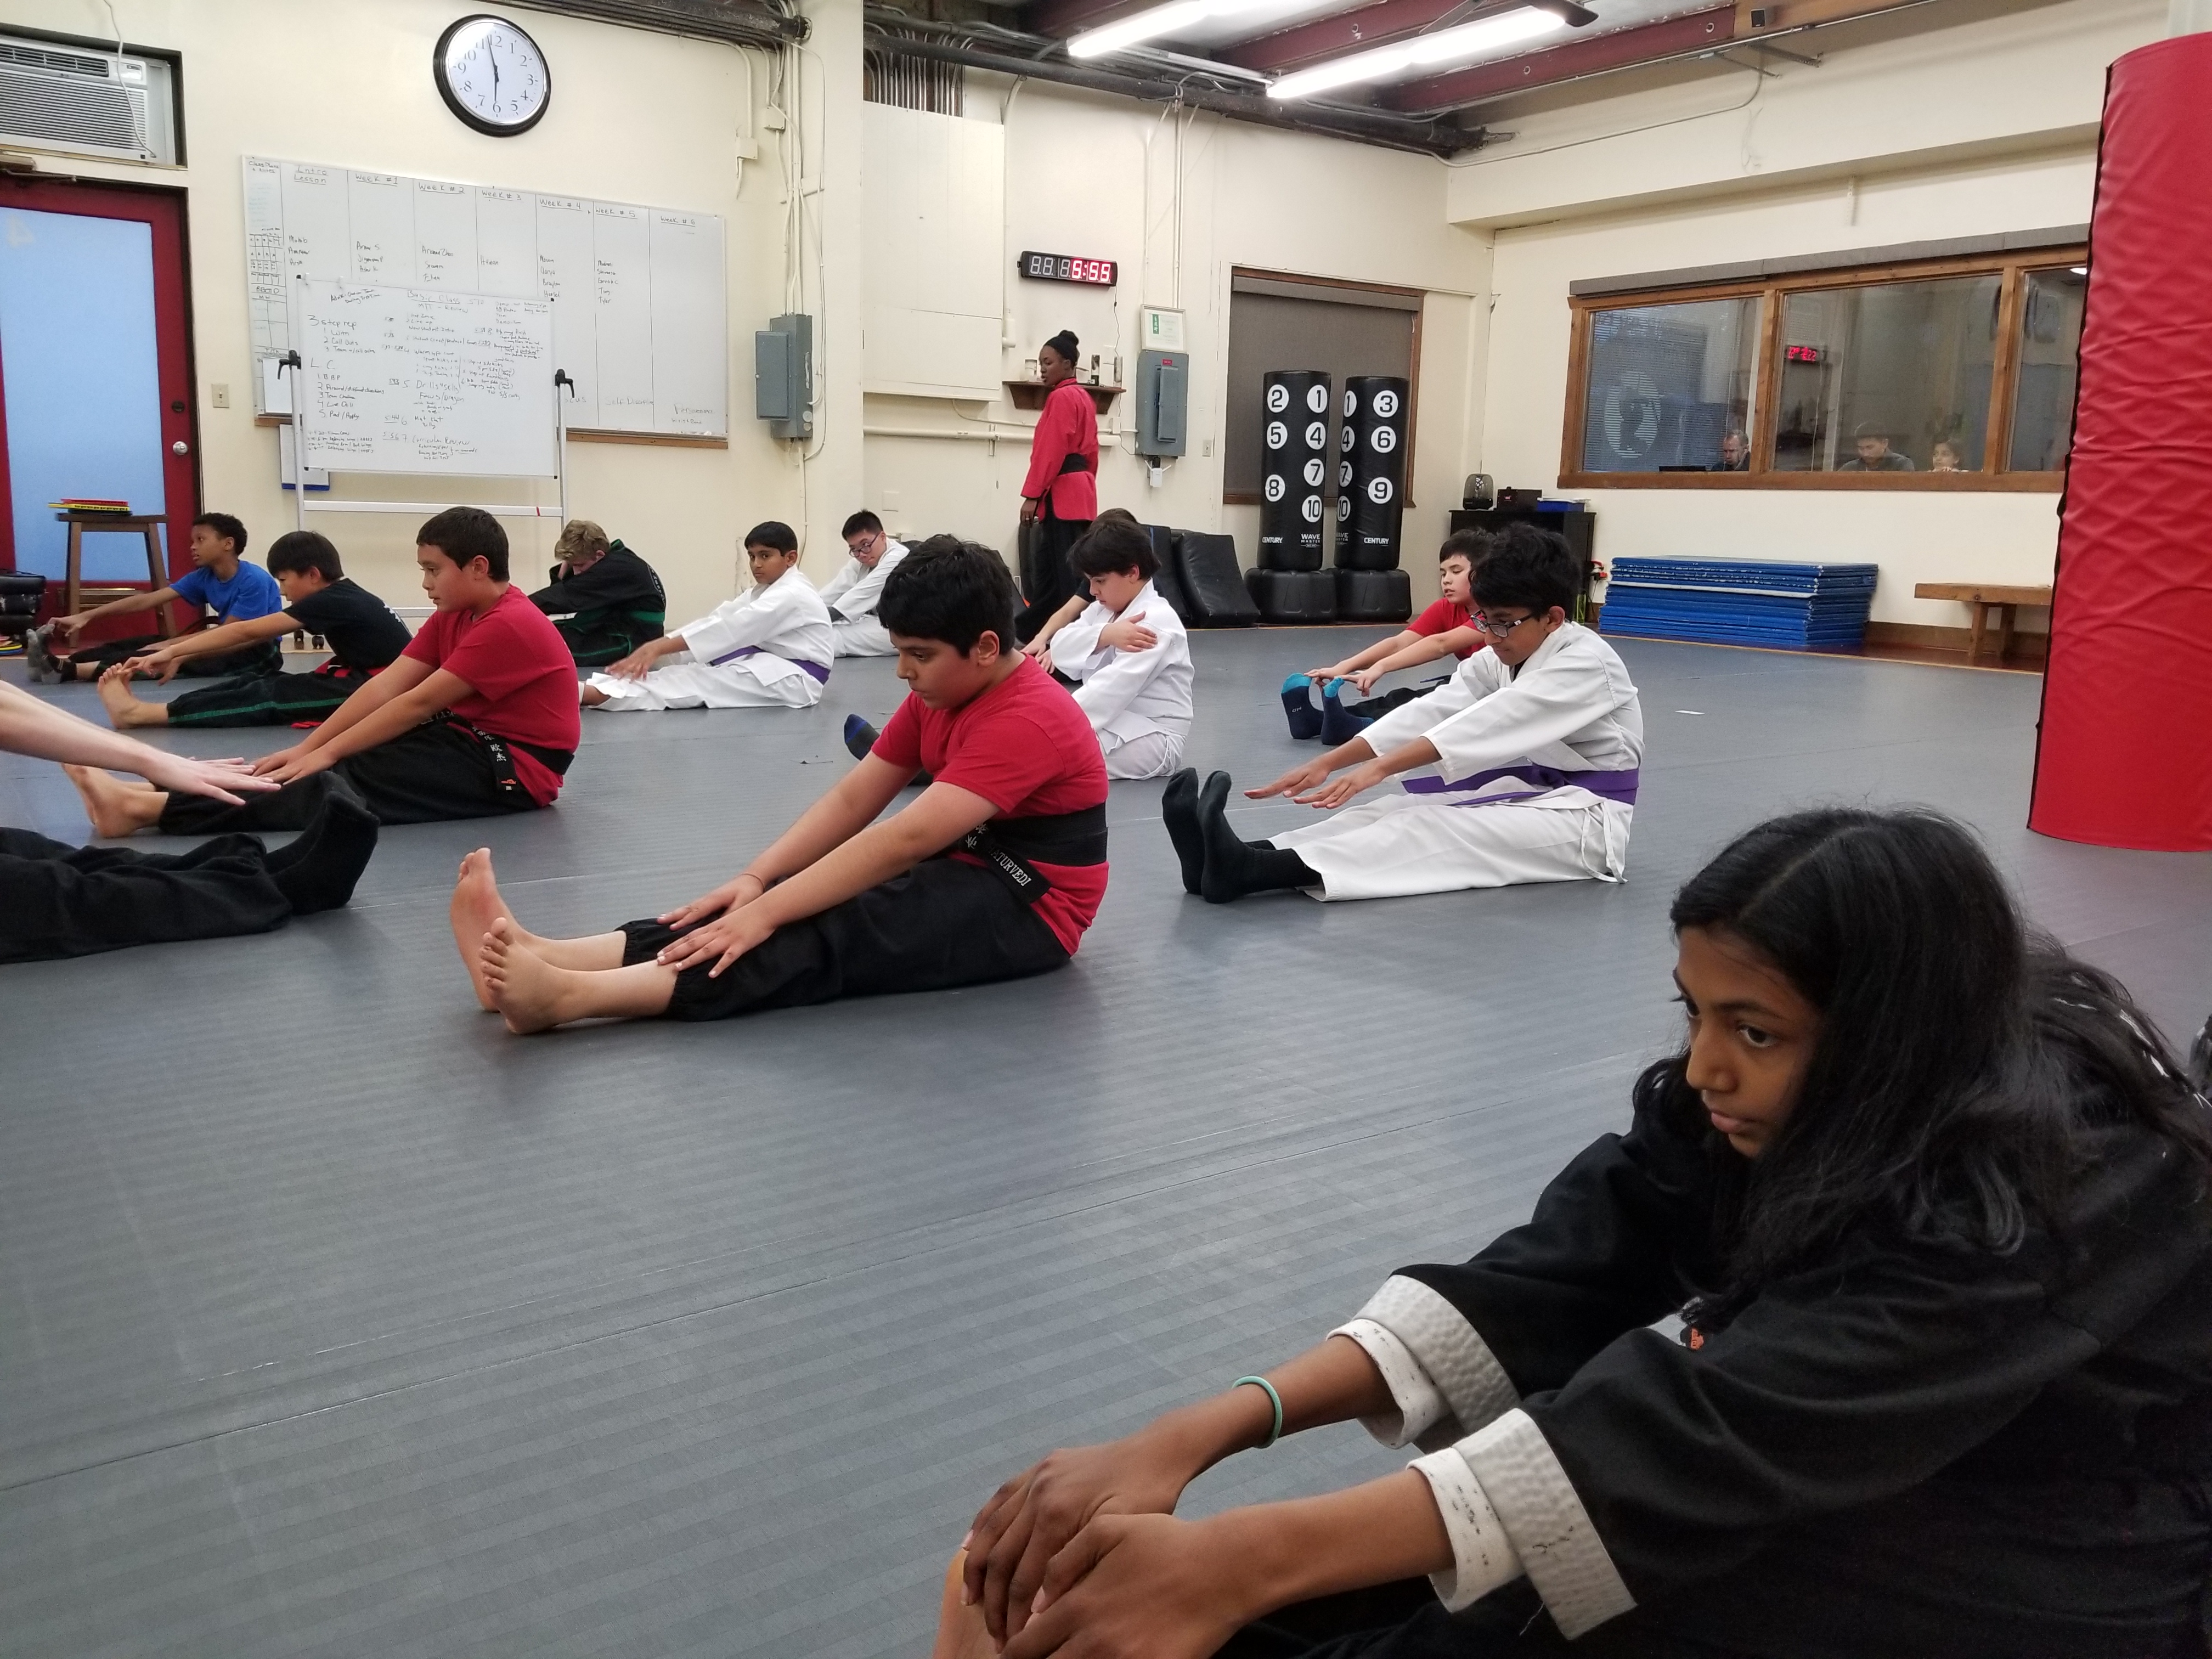 Bellevue karate for kids image of youth in stretching in karate class